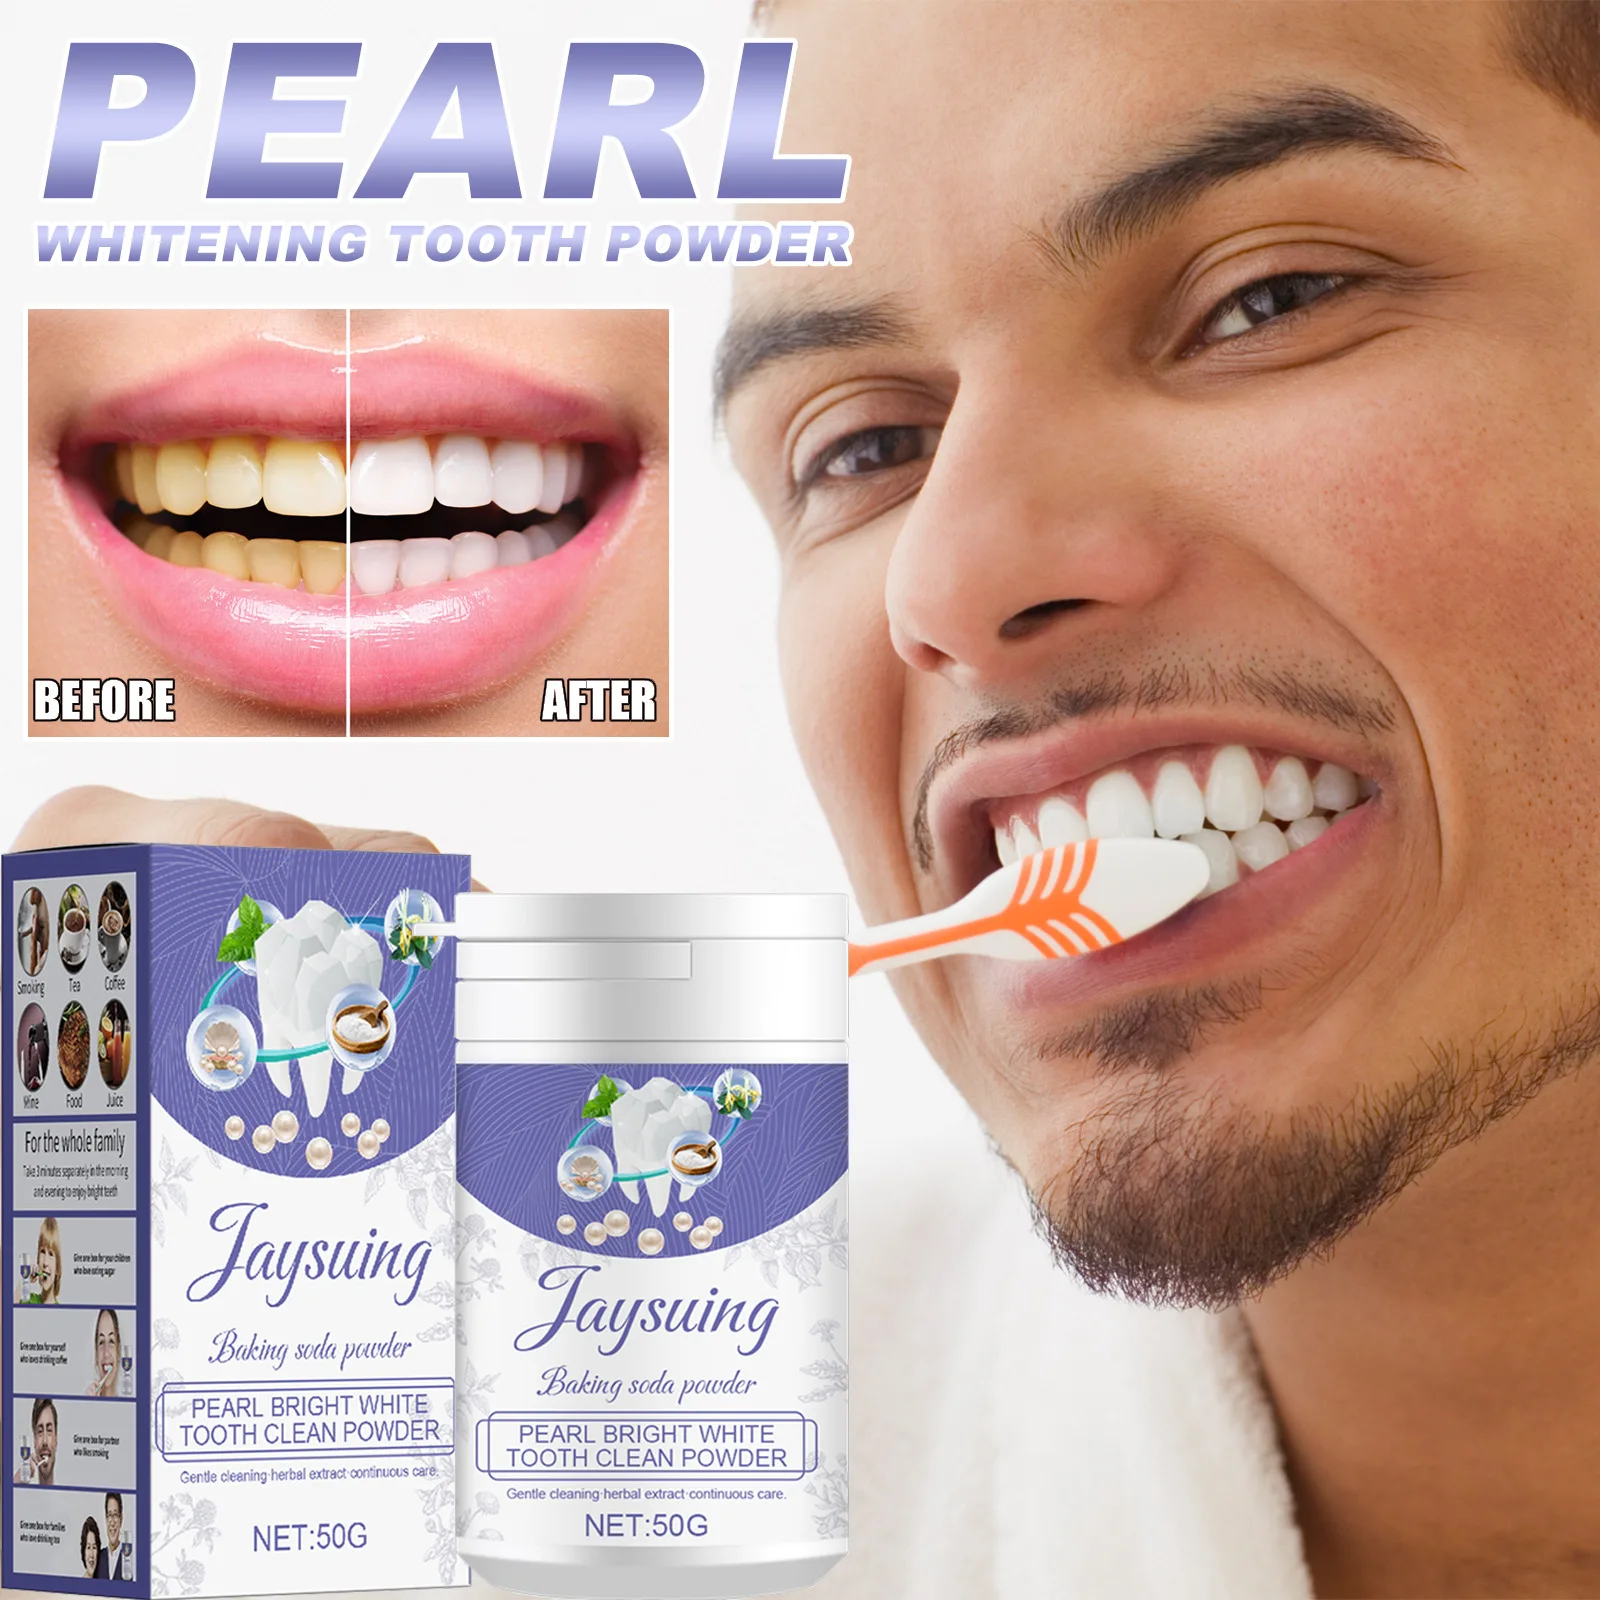 50G Professional Dental Whitening Teeth Powder Quickly Tartar Removal Effective Tooth Cleaning Whitener Toothpaste Health Care